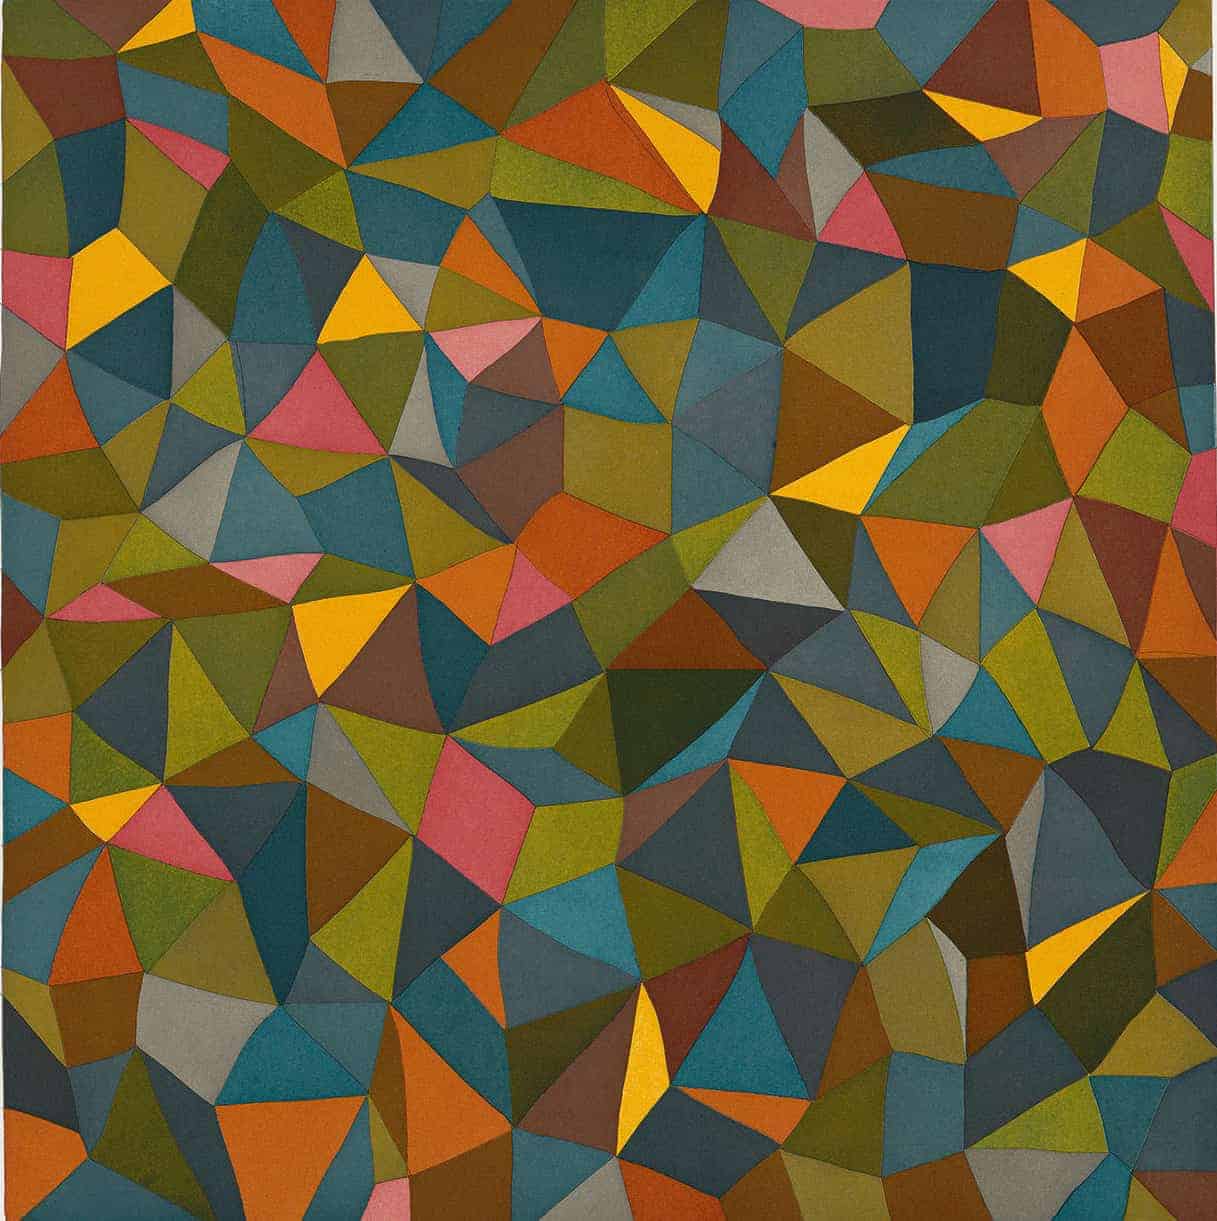 A pattern of tapering triangles and diamonds in autumn colors, one of Sol LeWitt's series of Complex Forms prints, appears in Strict Beauty at the Williams College Museum of Art. Press image courtesy of WCMA.